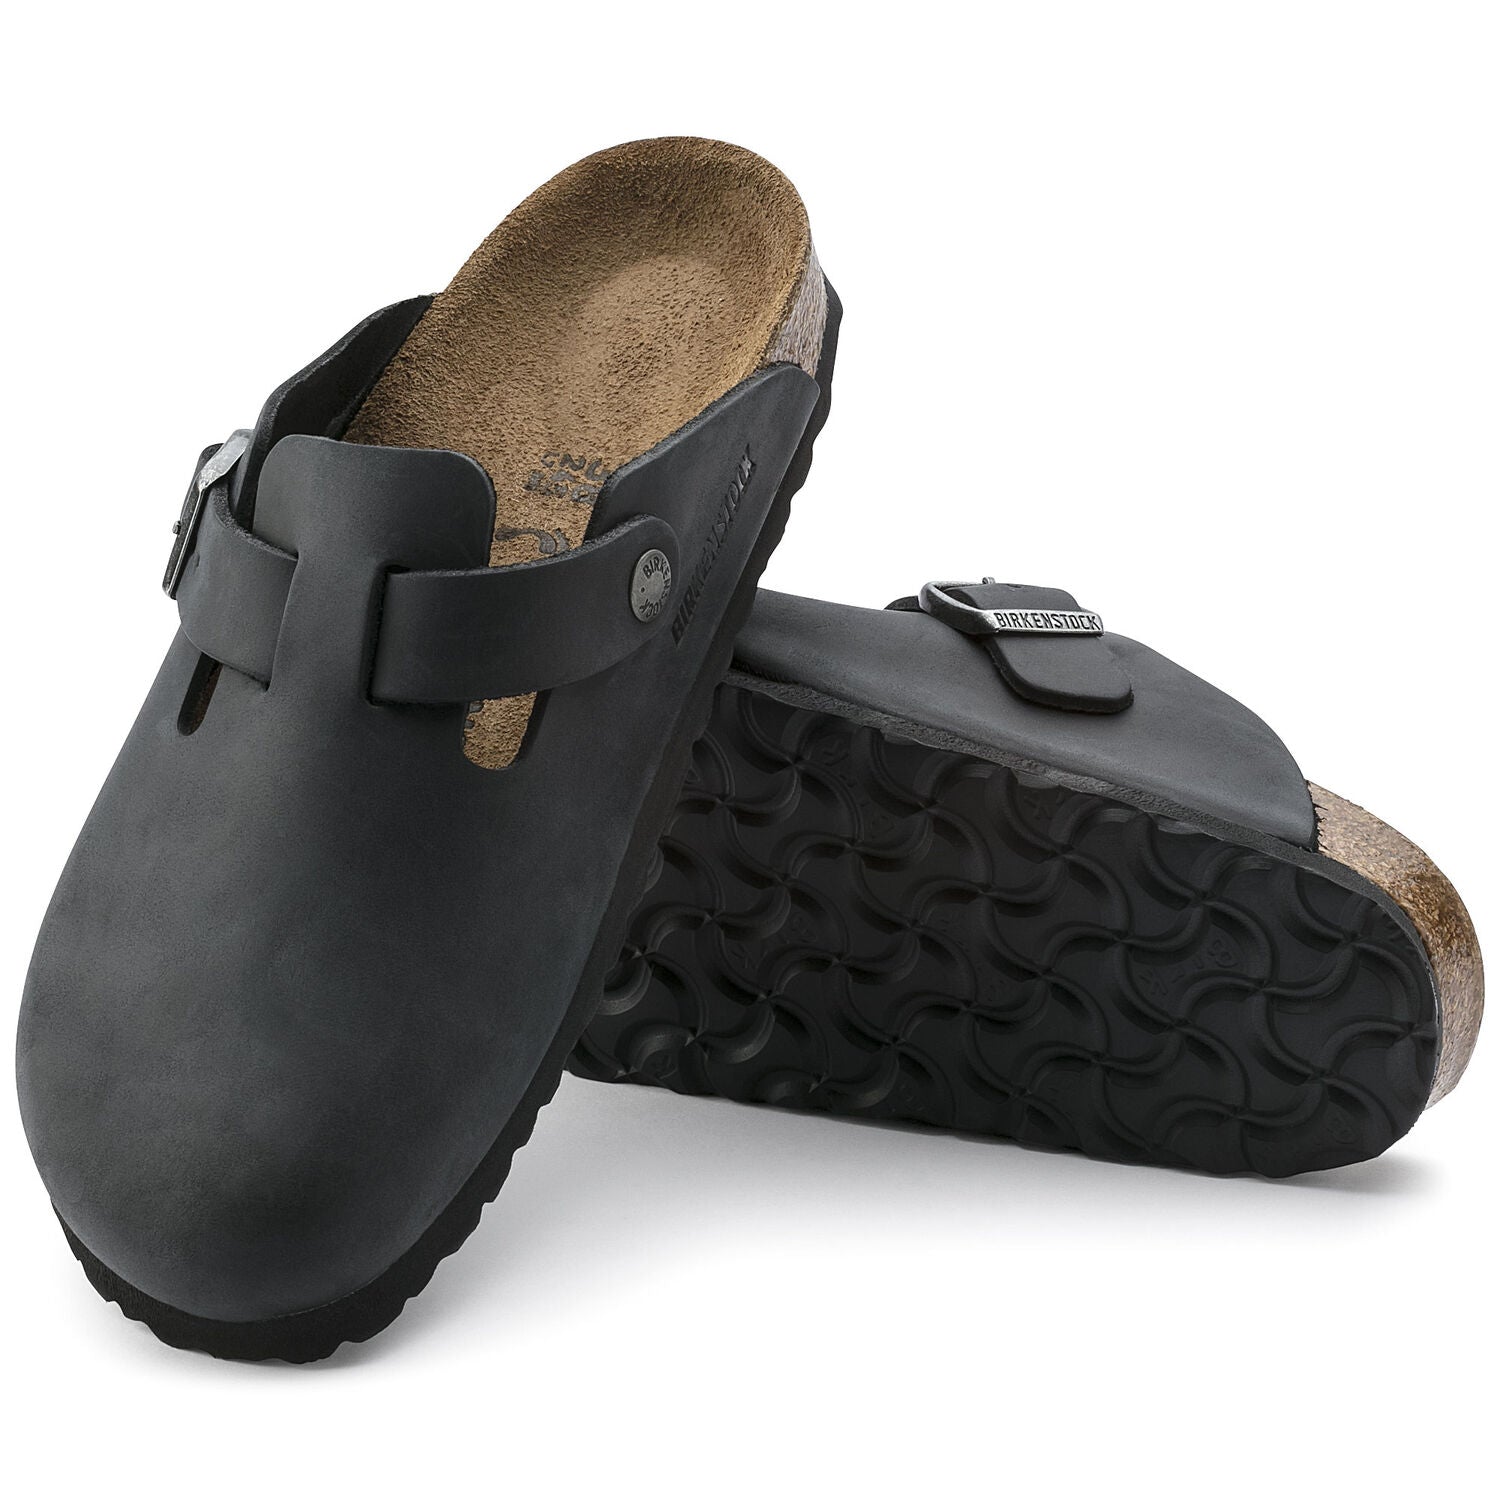 Boston Oiled Leather - Regular Footbed